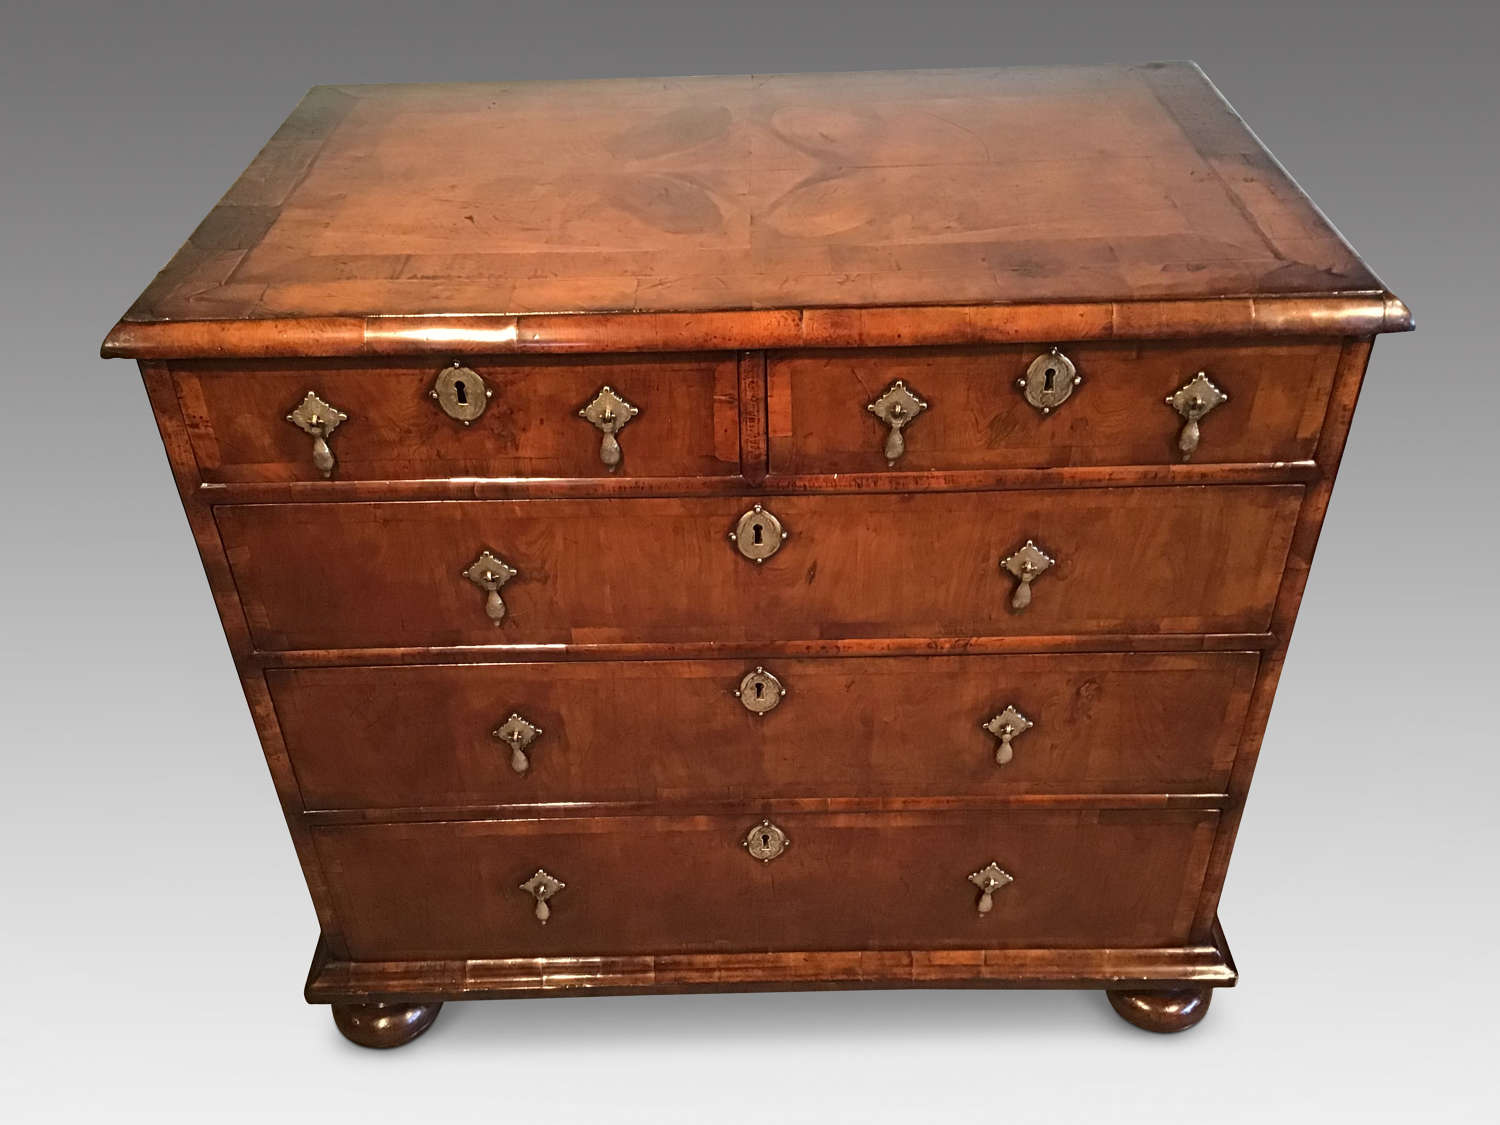 Antique yew wood chest of drawers